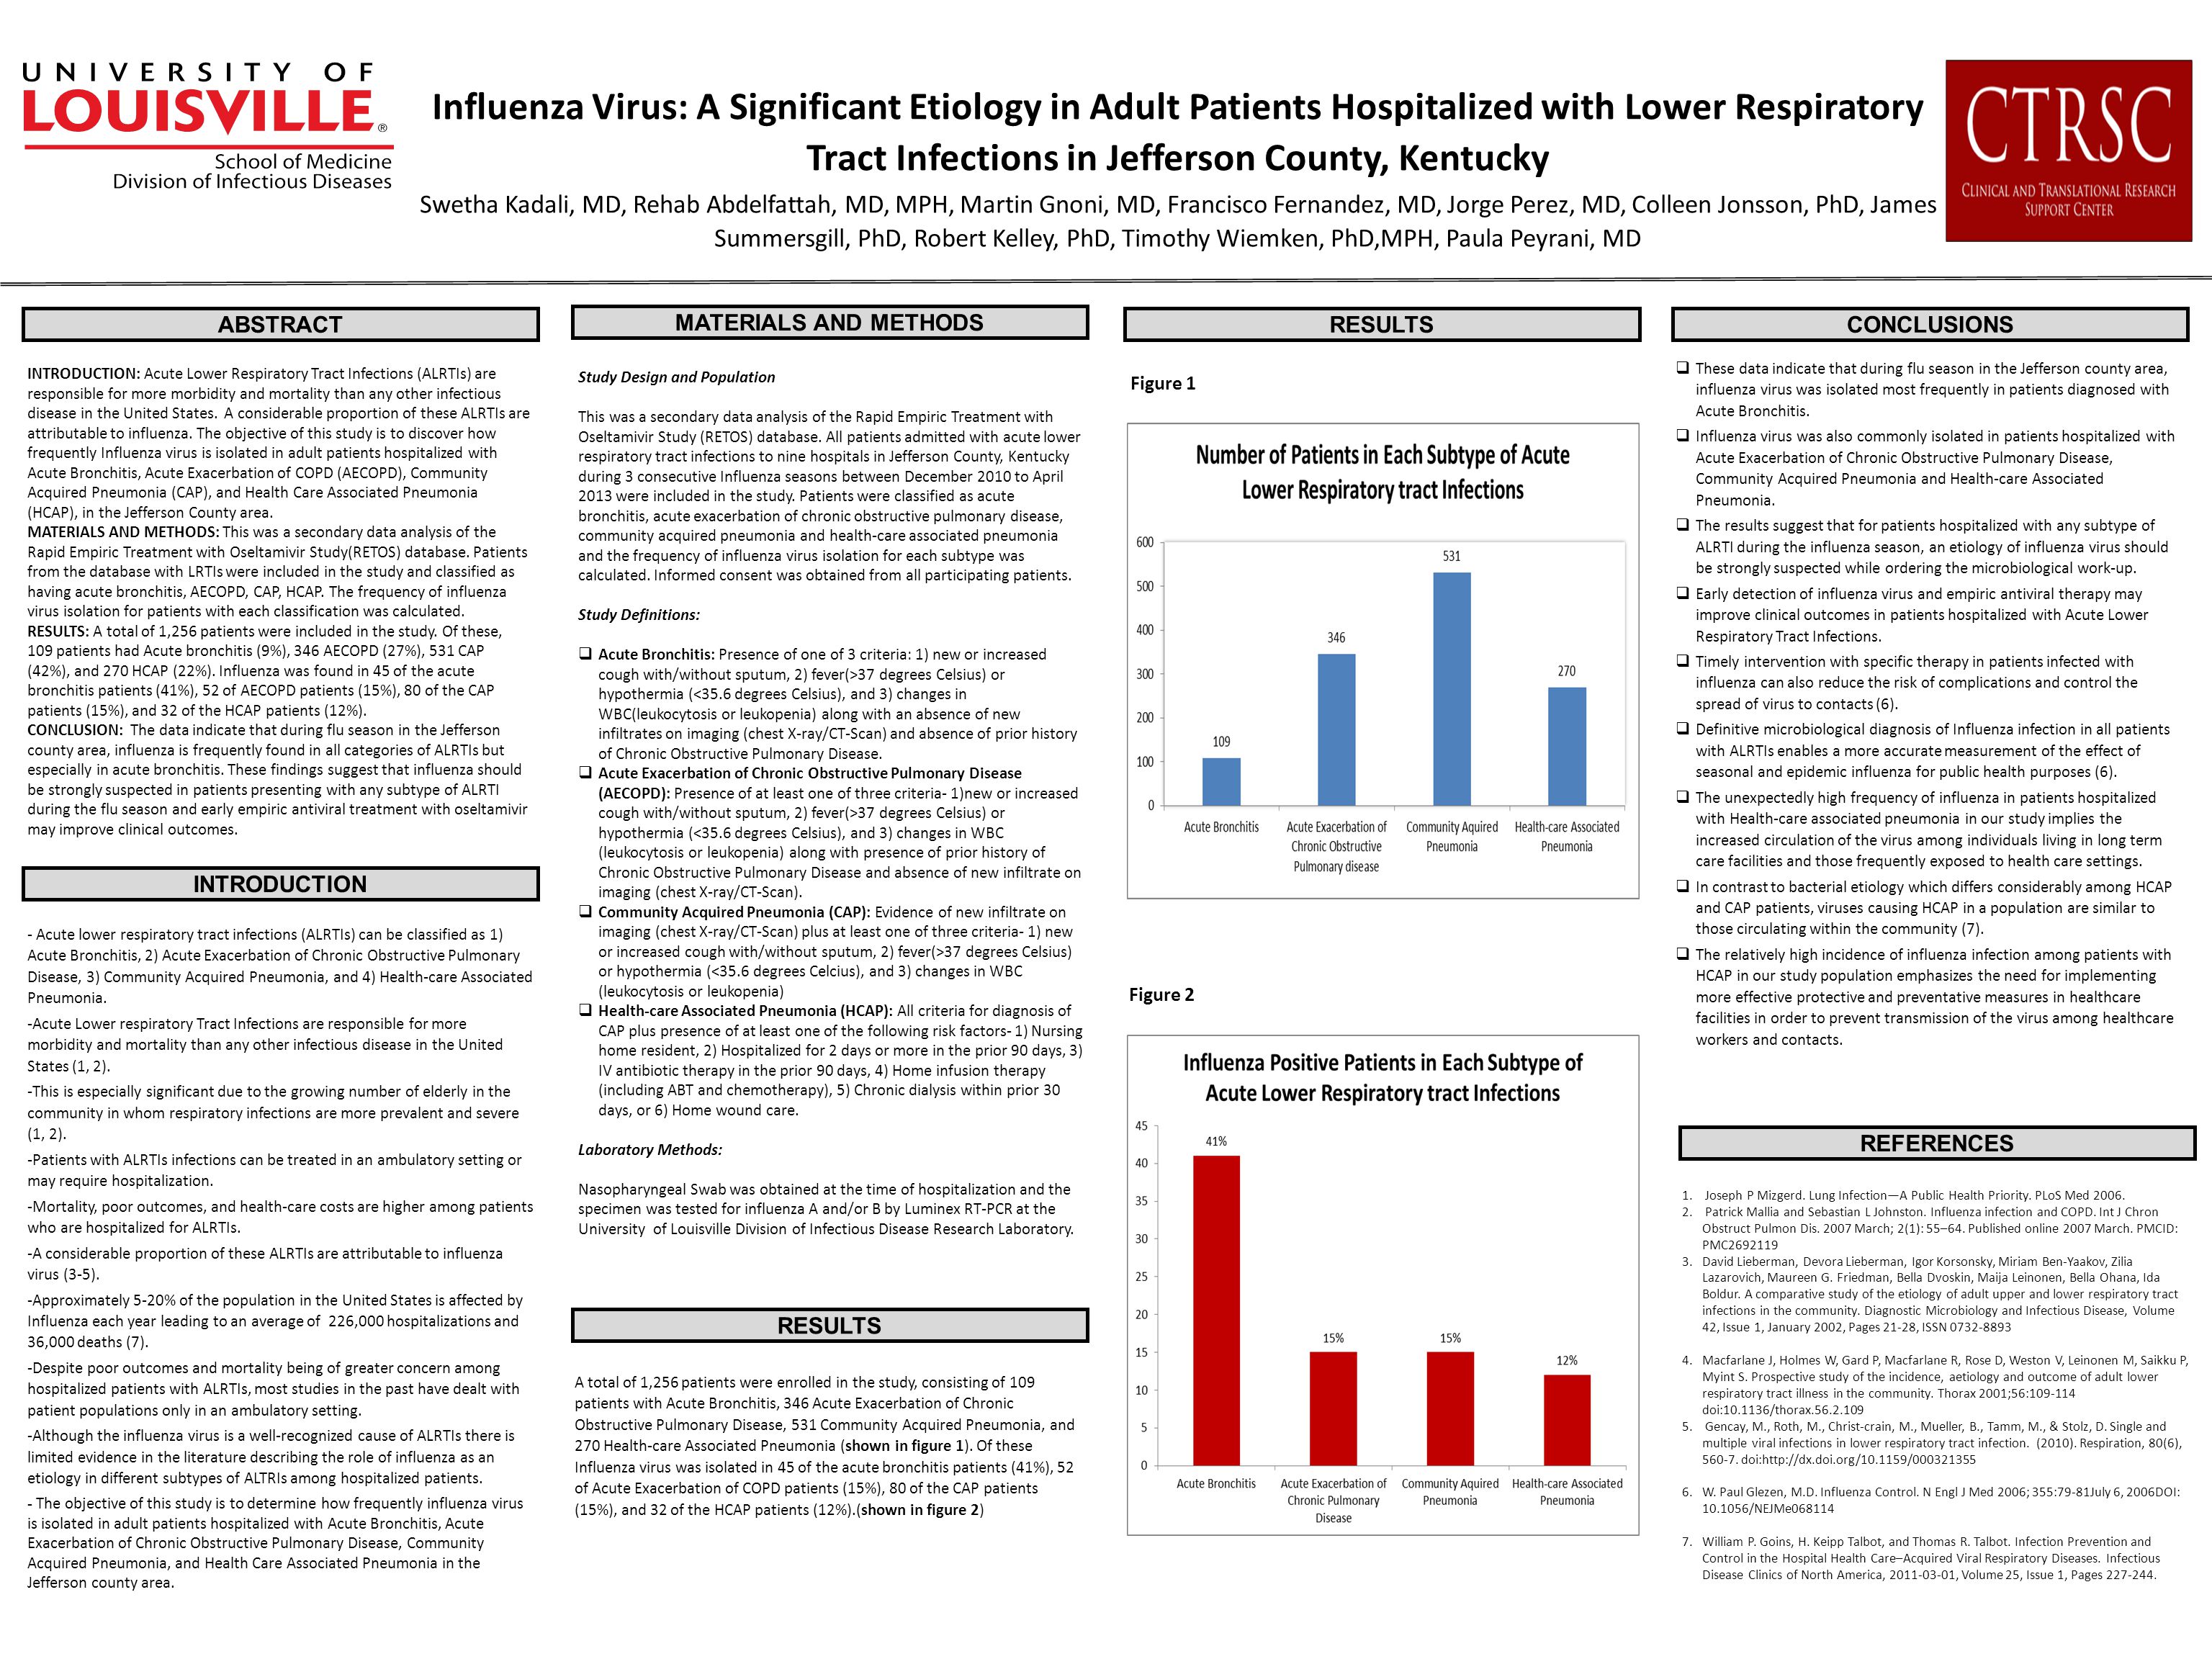 Influenza Virus: A Significant Etiology in Adult Patients Hospitalized with Lower Respiratory Tract Infections in Jefferson County, Kentucky Swetha Kadali, MD, Rehab Abdelfattah, MD, MPH, Martin Gnoni, MD, Francisco Fernandez, MD, Jorge Perez, MD, Colleen Jonsson, PhD, James Summersgill, PhD, Robert Kelley, PhD, Timothy Wiemken, PhD,MPH, Paula Peyrani, MD ABSTRACT REFERENCES RESULTS INTRODUCTION: Acute Lower Respiratory Tract Infections (ALRTIs) are responsible for more morbidity and mortality than any other infectious disease in the United States.